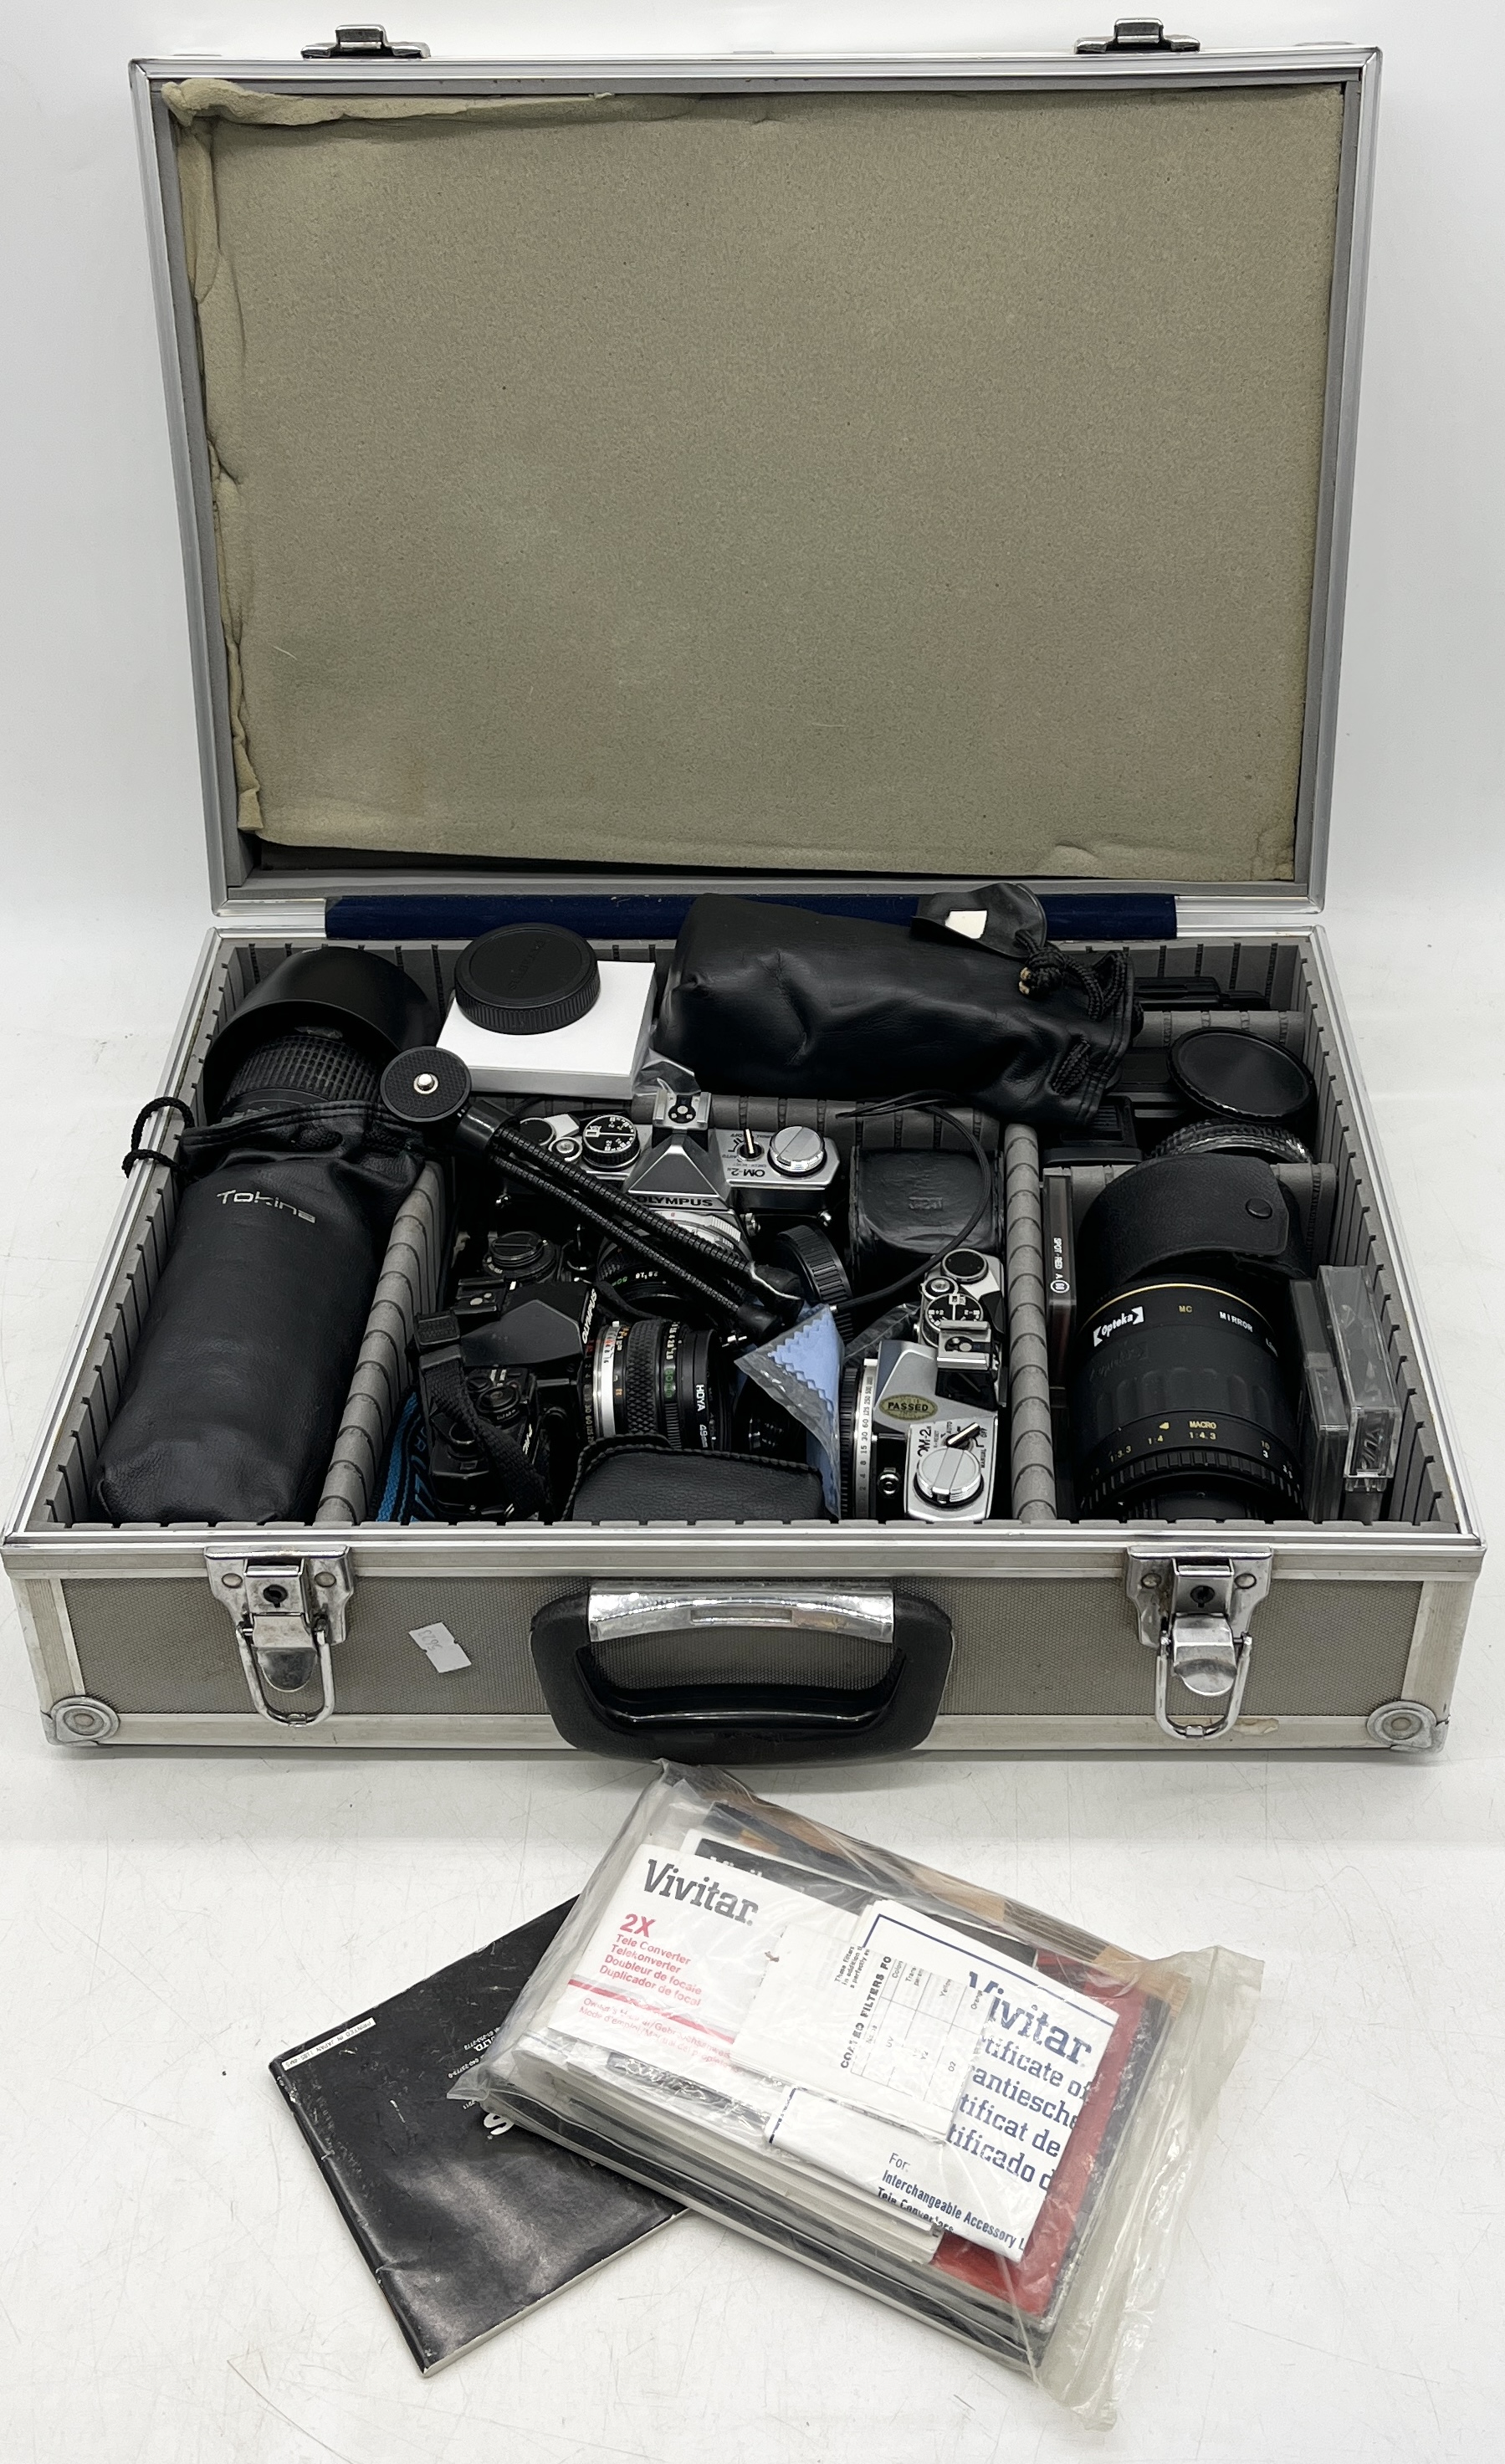 A cased collection of cameras, lenses and accessories including Olympus OM-2, Olympus OM-4 etc.